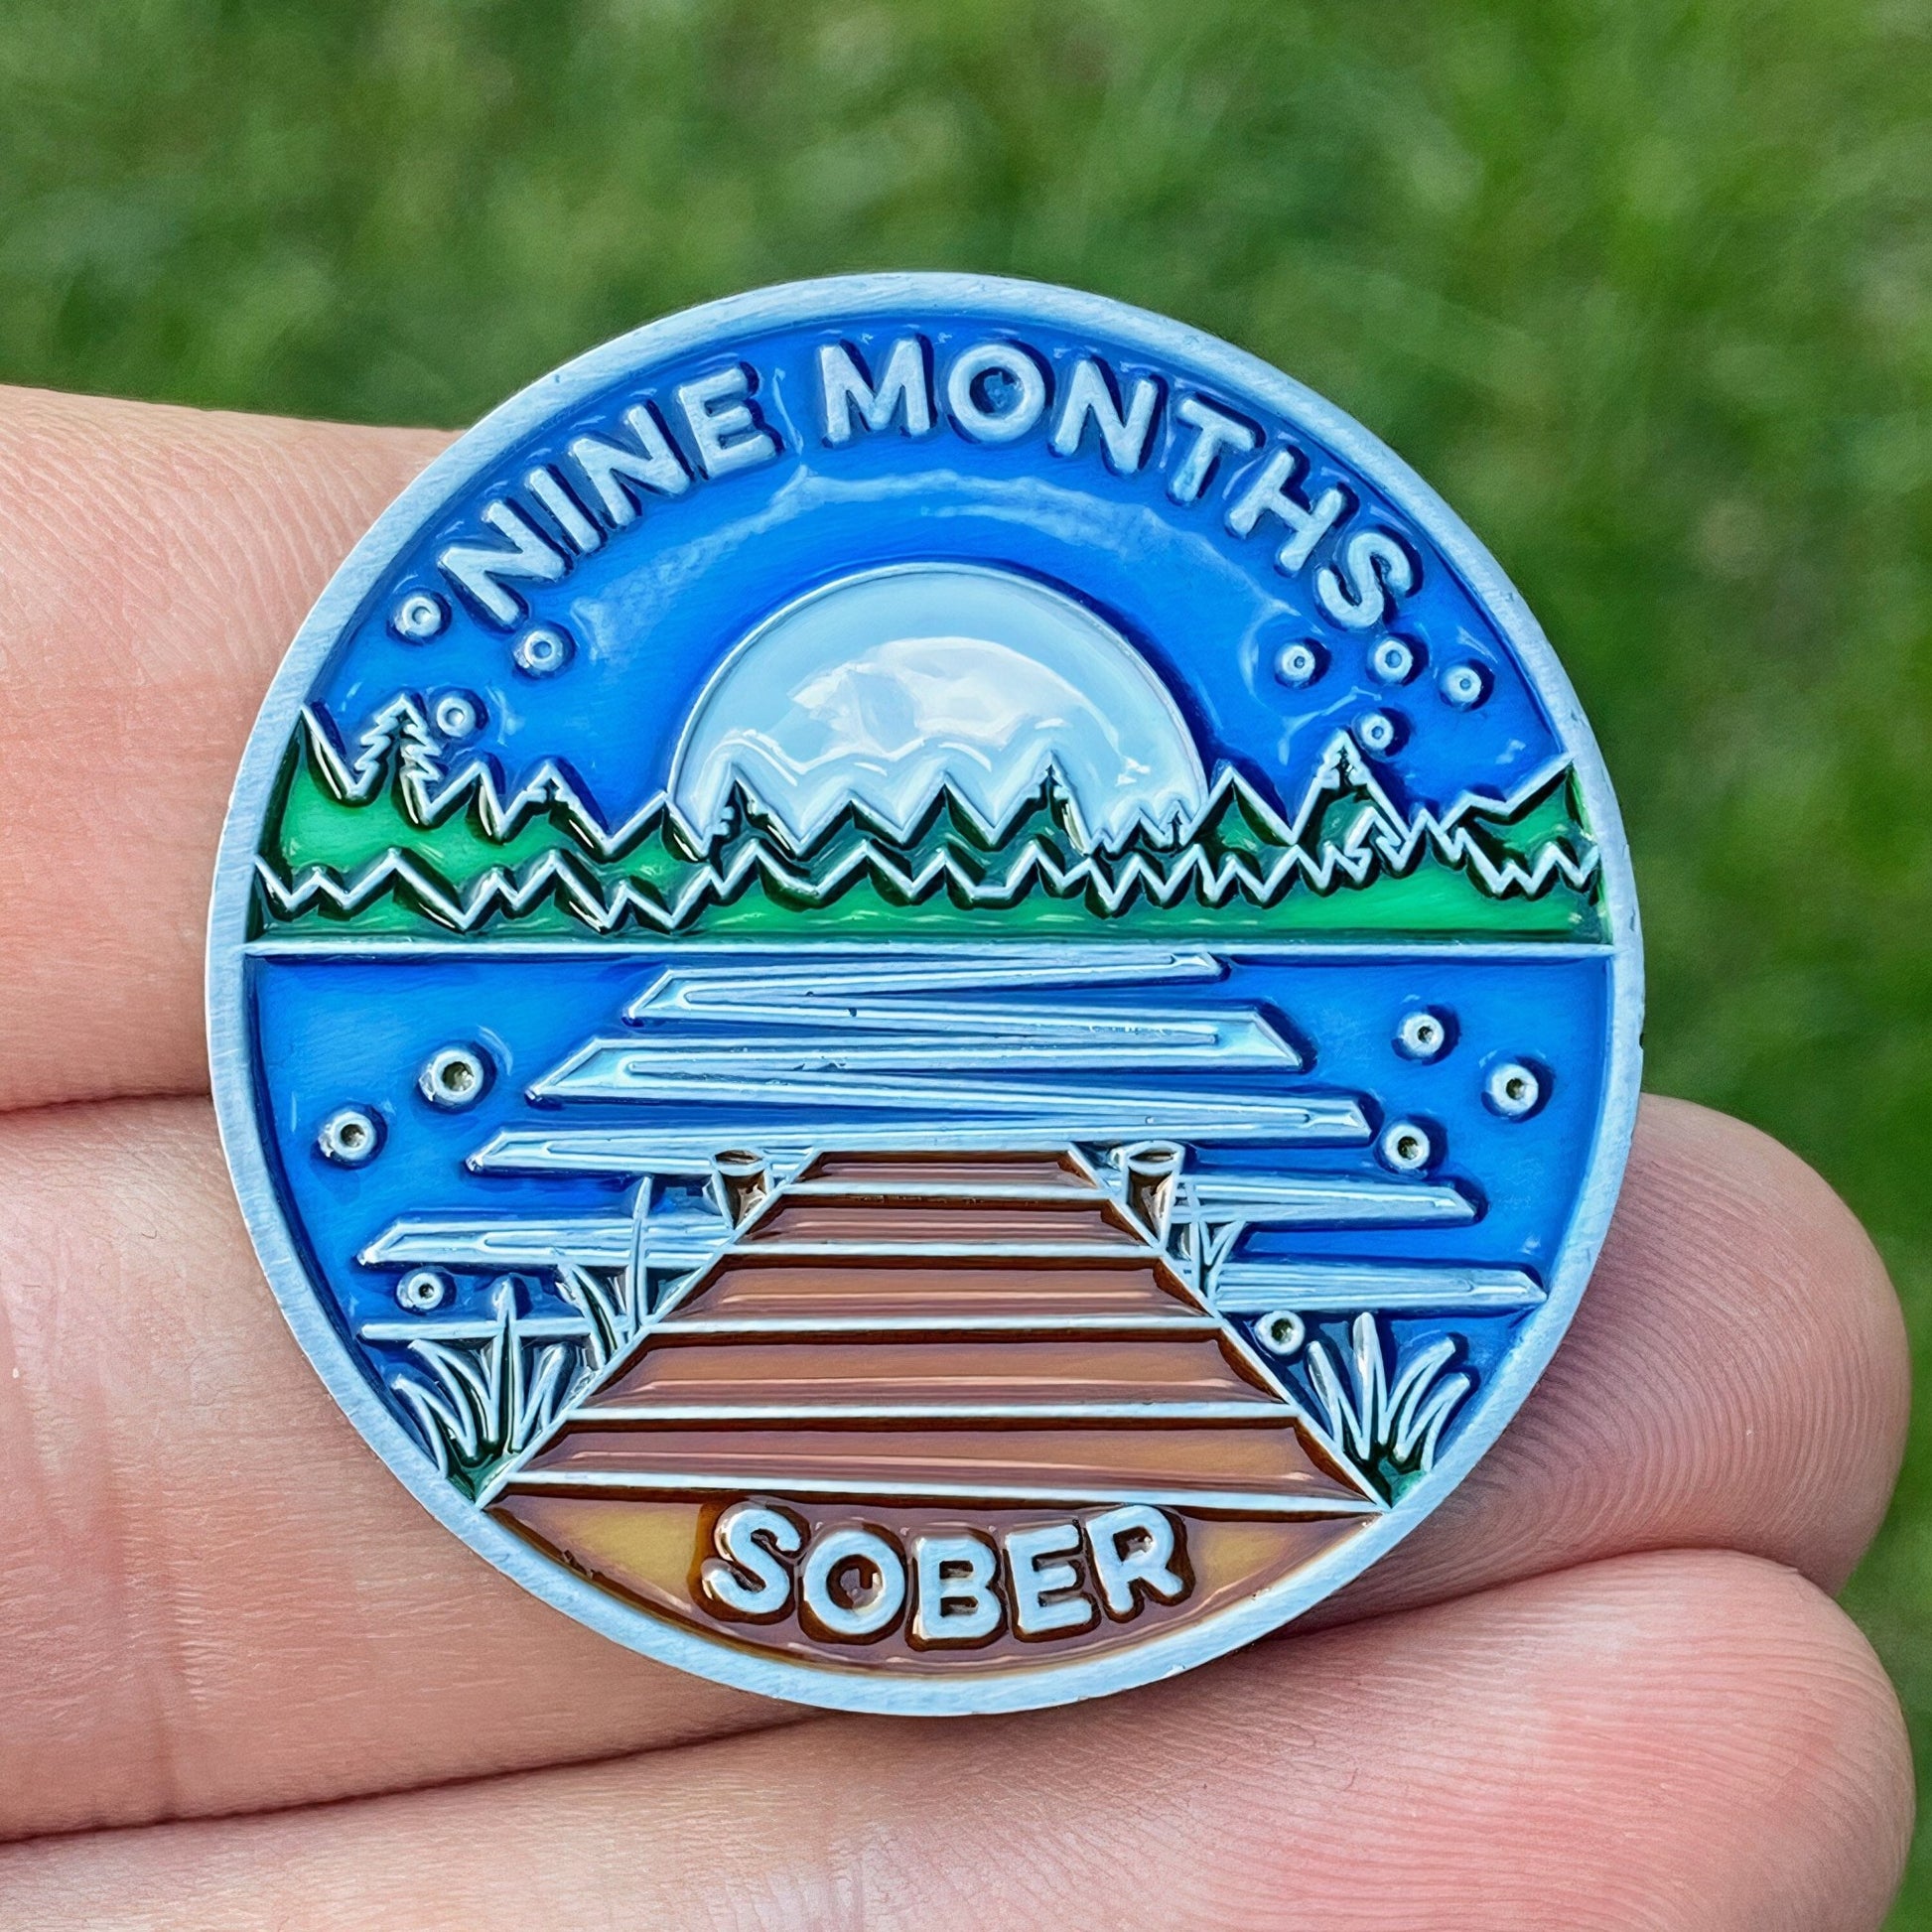 Nine Months Sober sobriety coin - The Achieve Mint